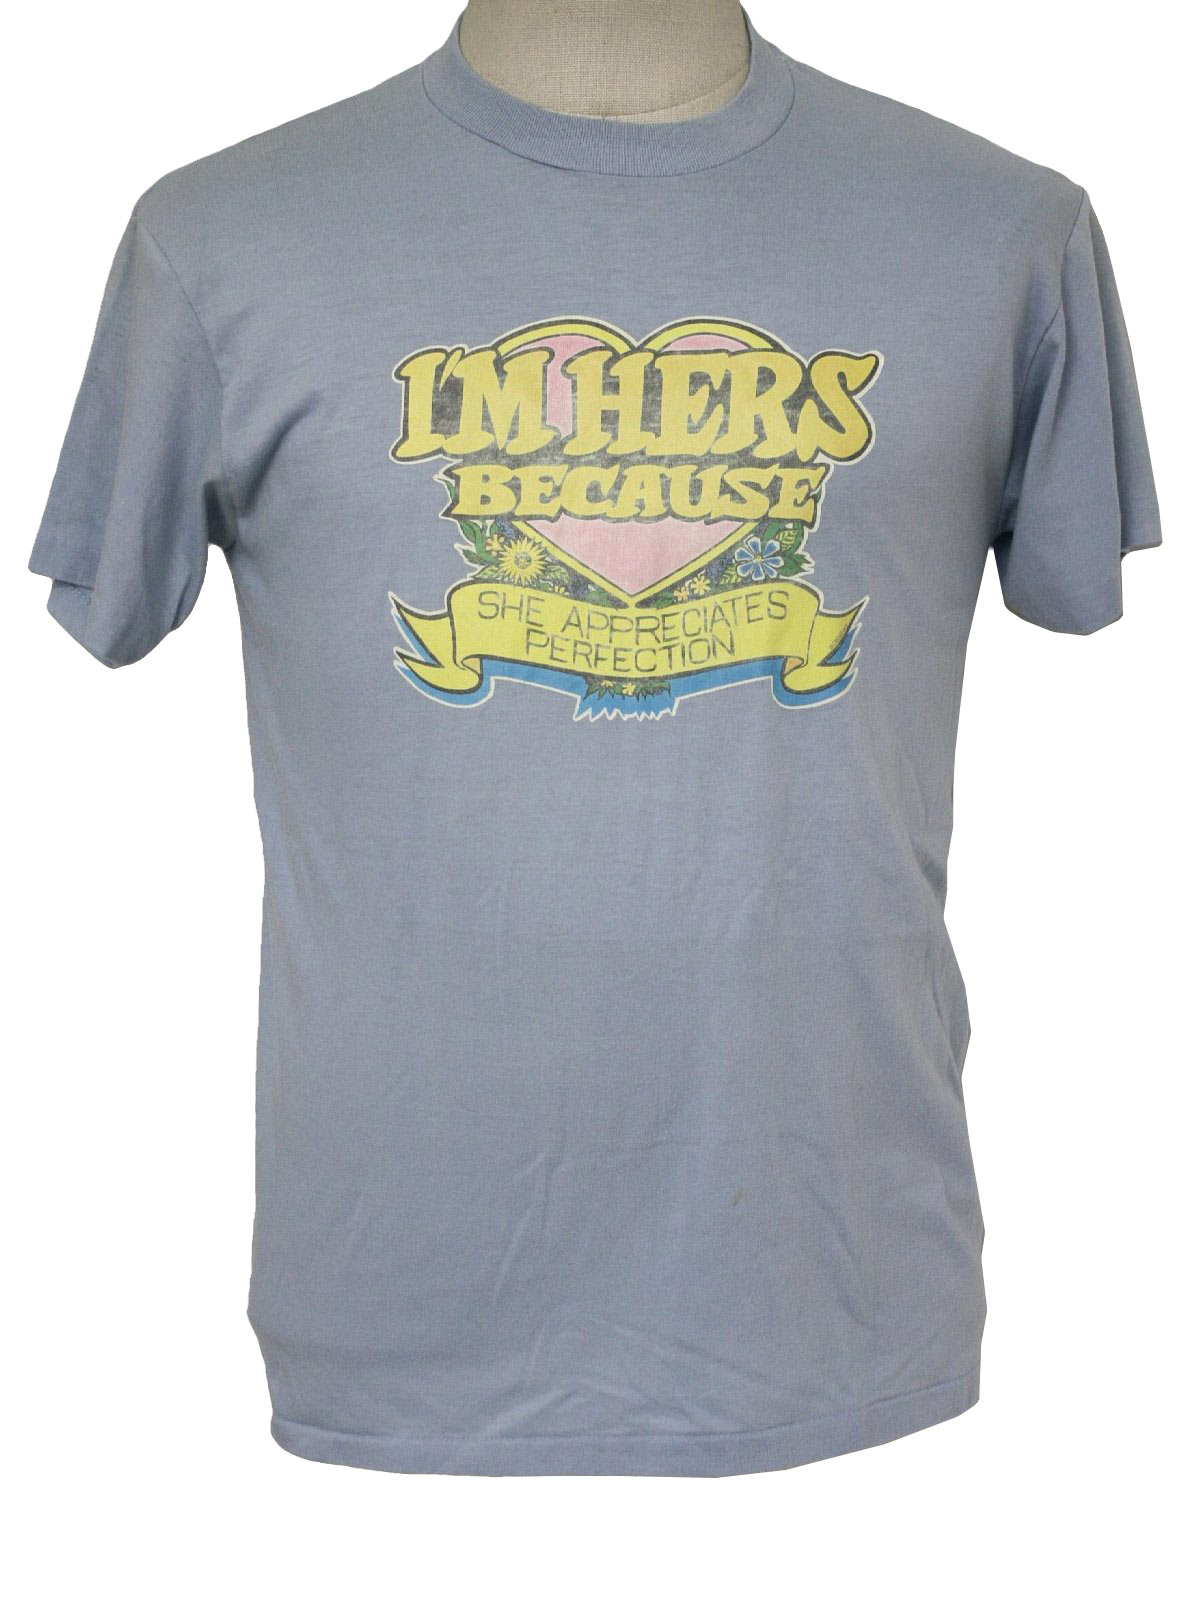 Seventies Vintage T Shirt: 70s -Sport T- Mens light blue, yellow, faded ...